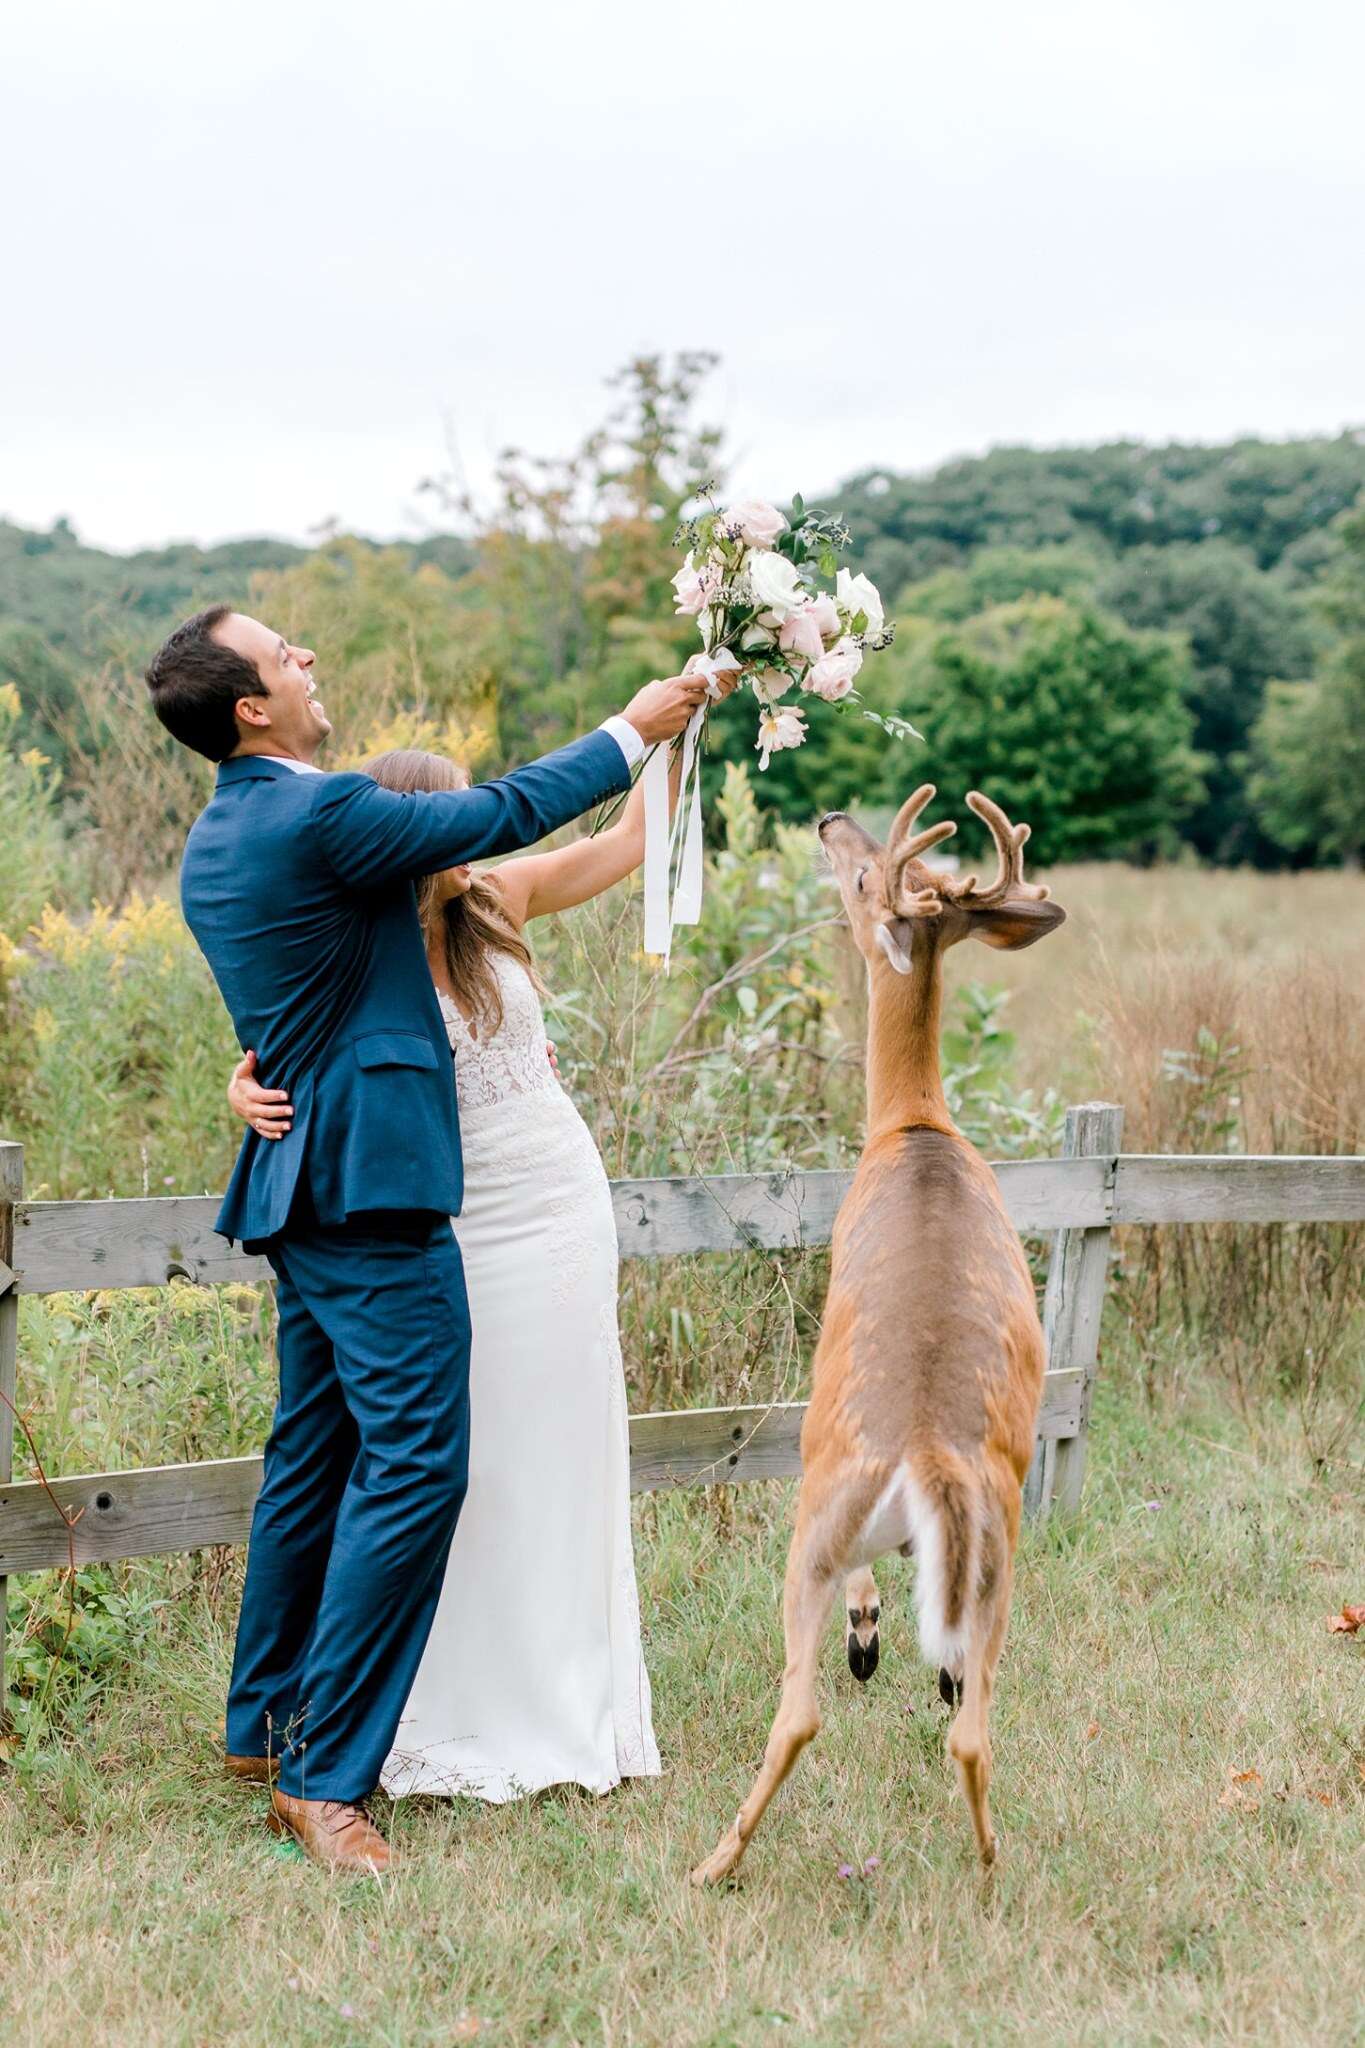 Wild deer chows down on bride's bouquet